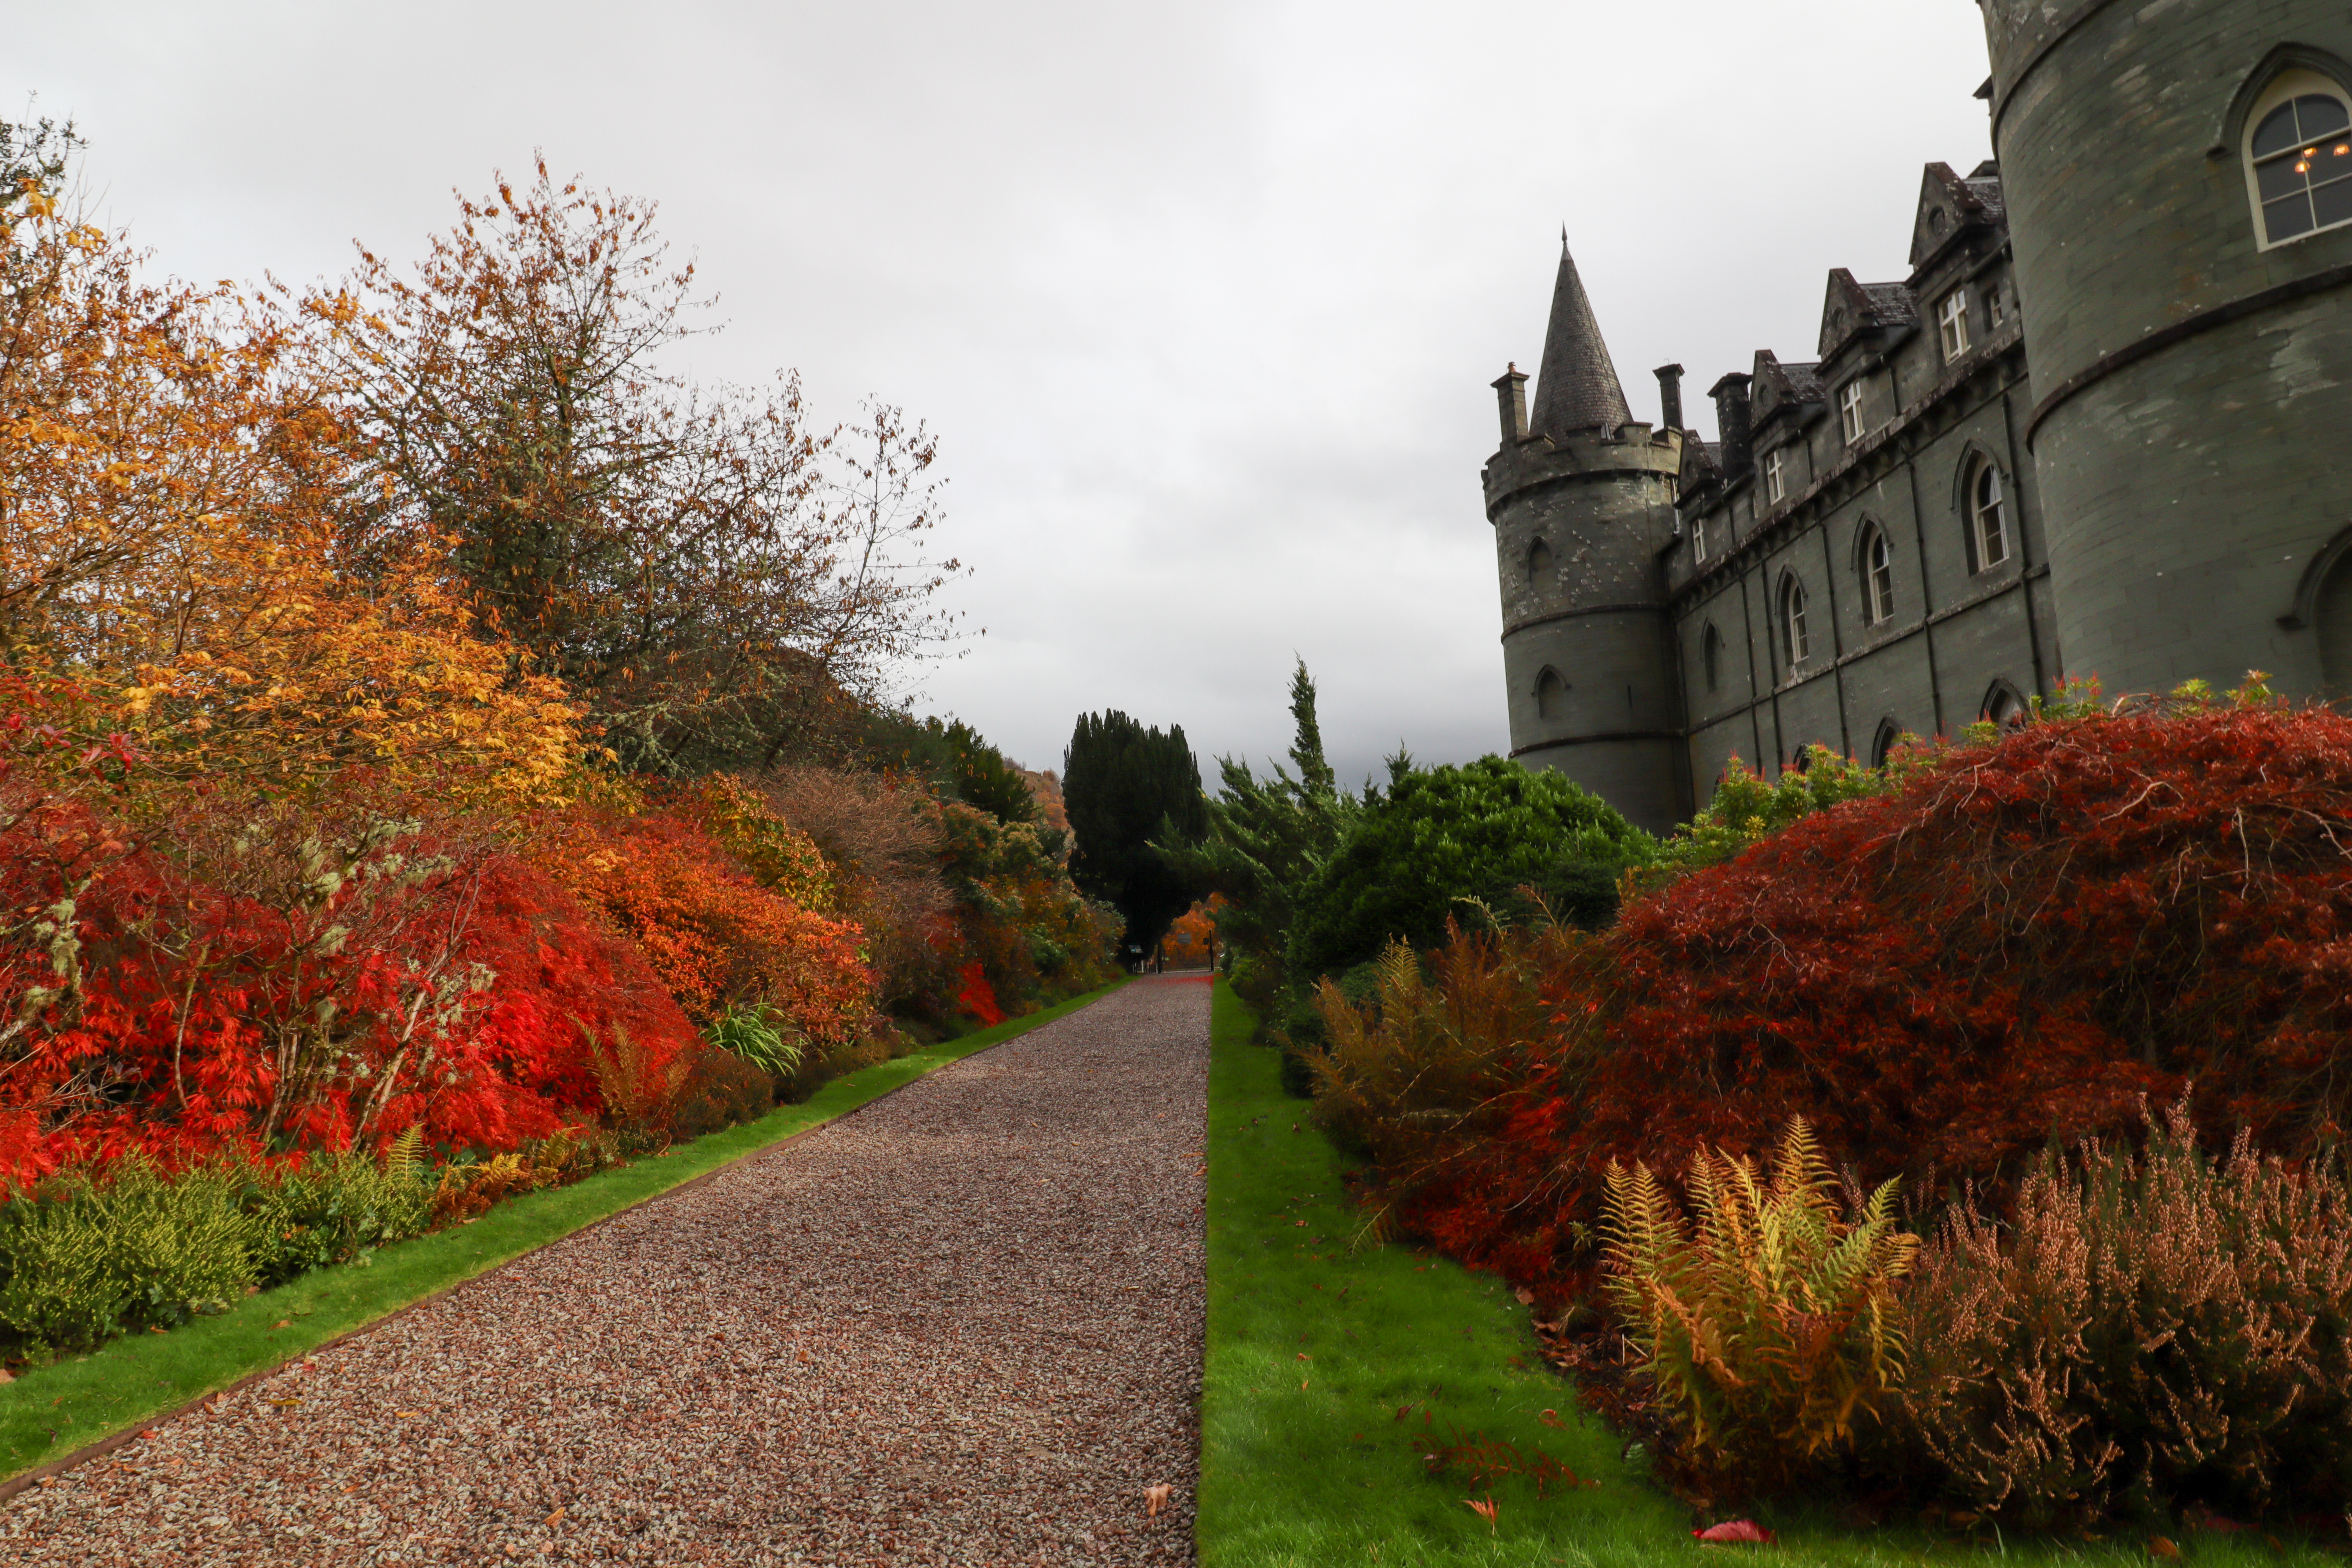 Bright red and orange trees with a castle to the right.